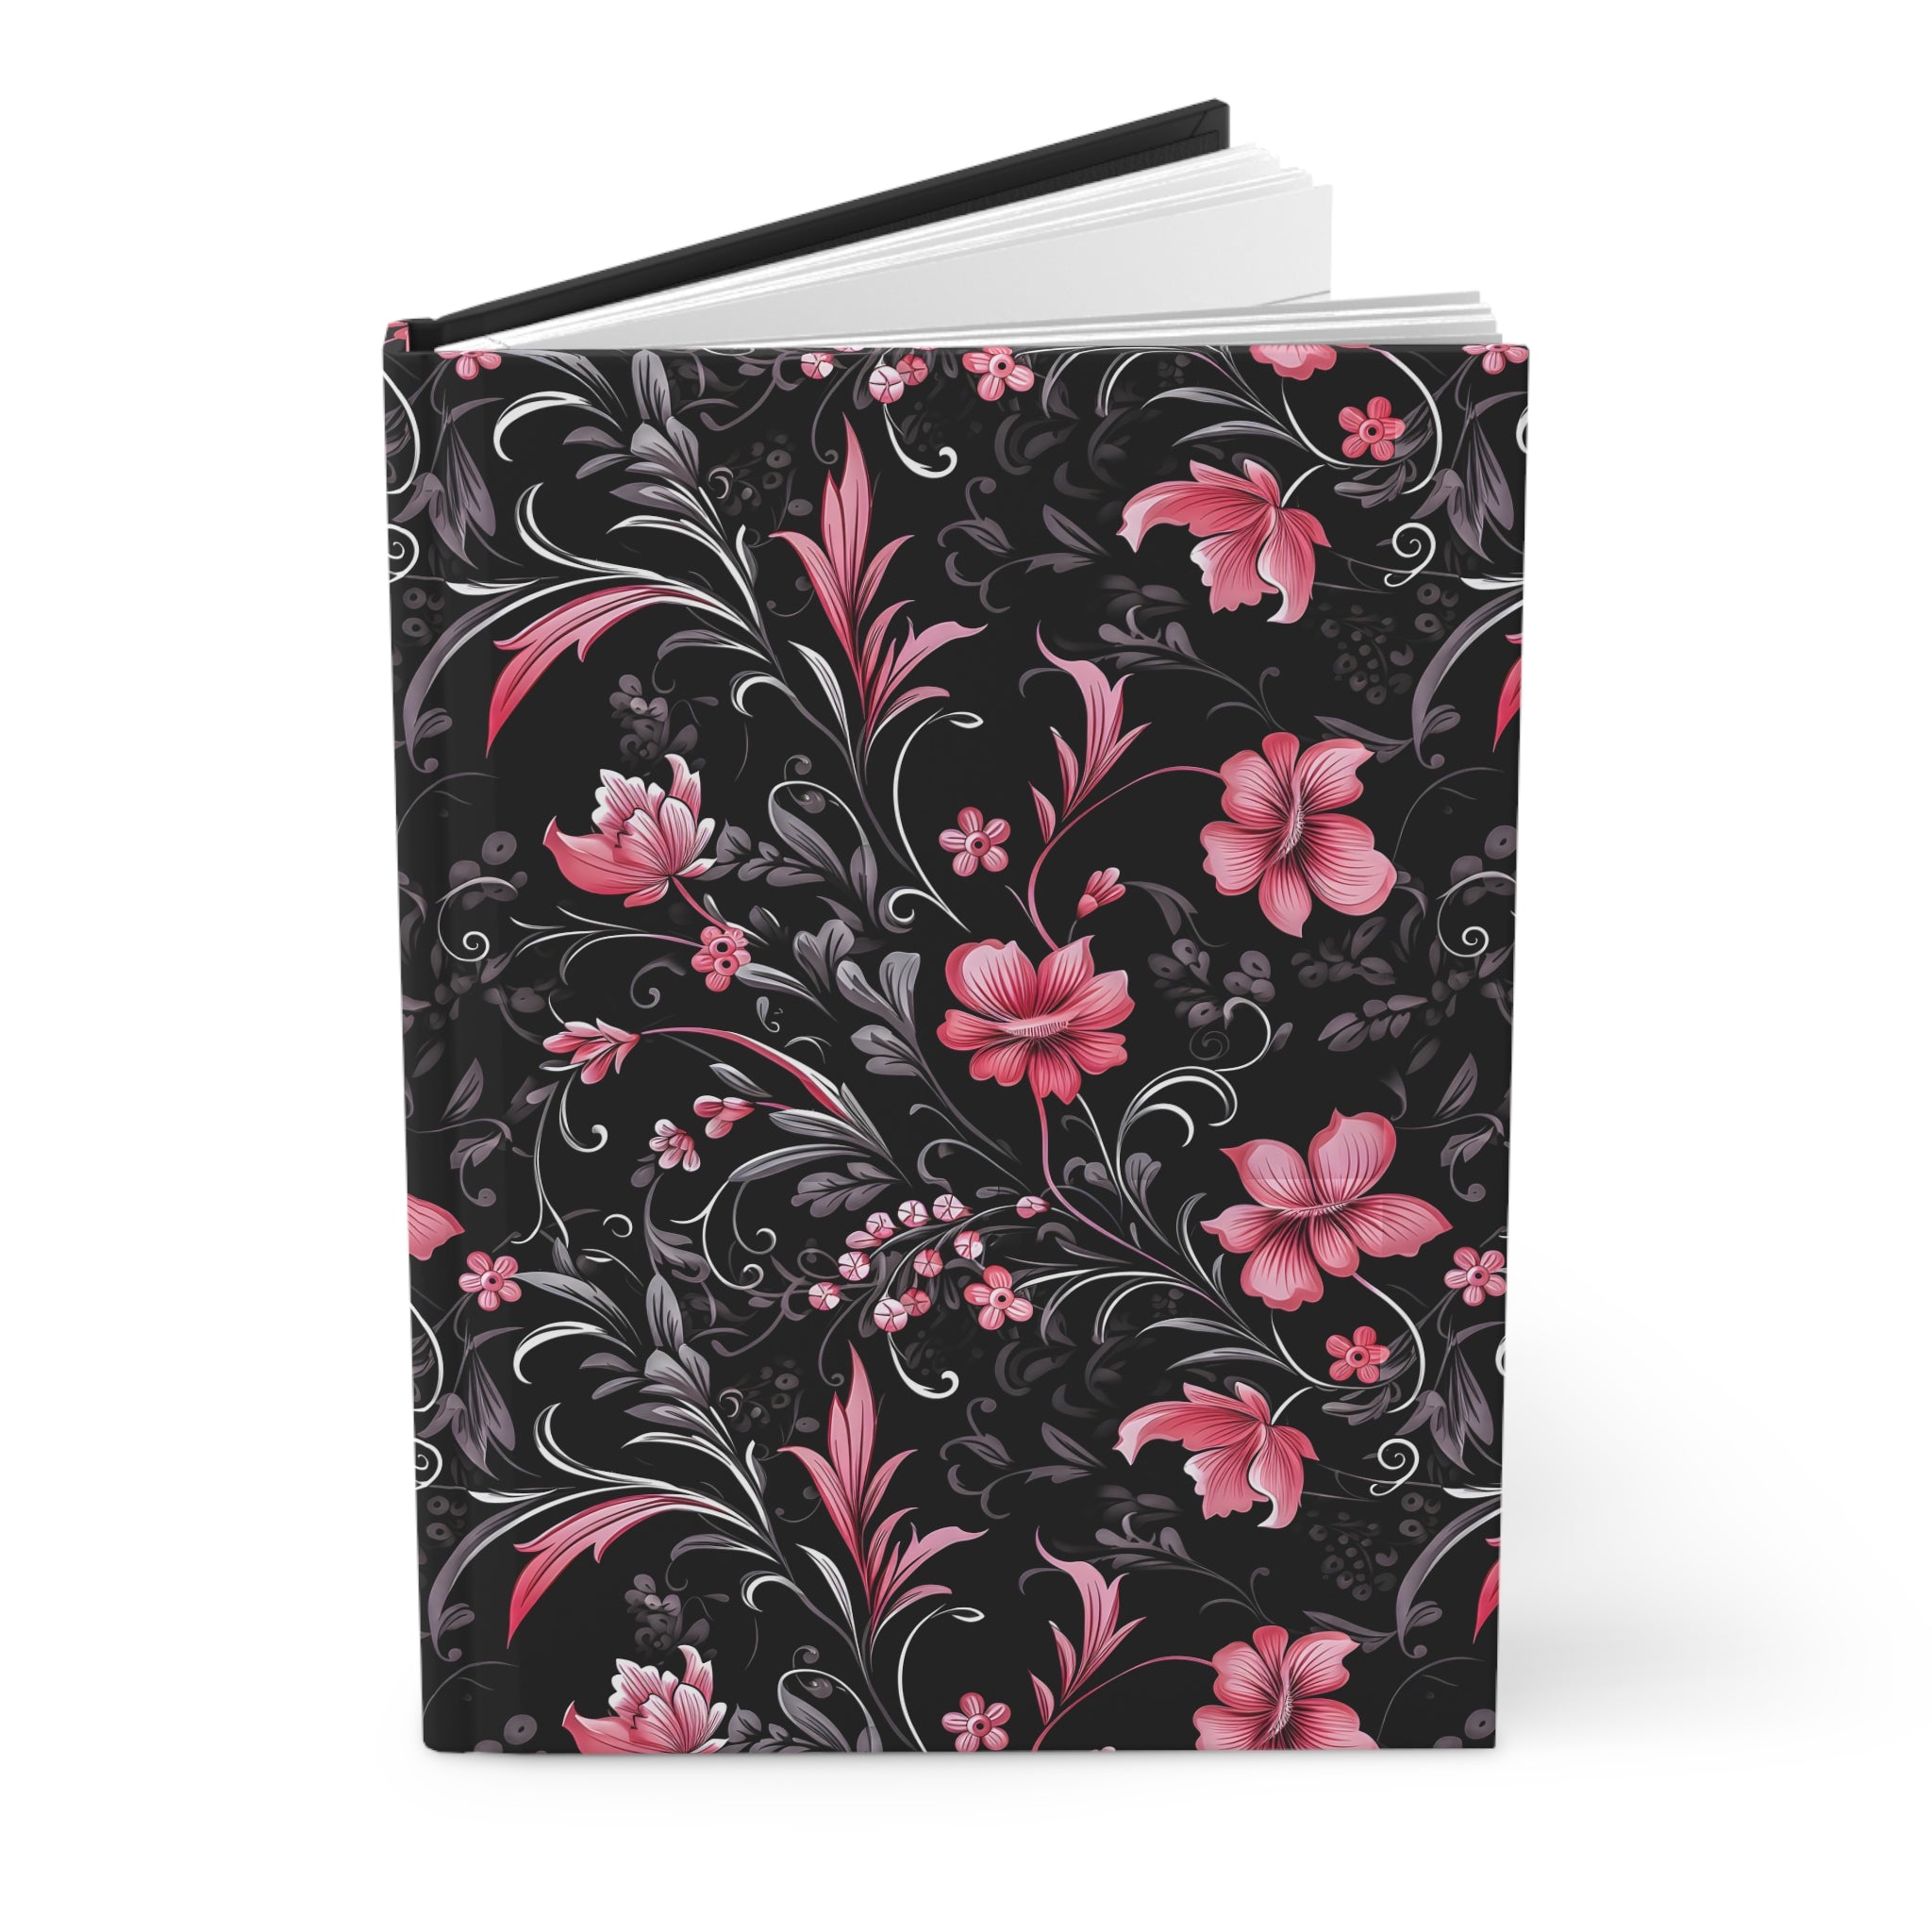 Pink Blossoms of Darkness Hardcover Notebook, 8 x 6 inch